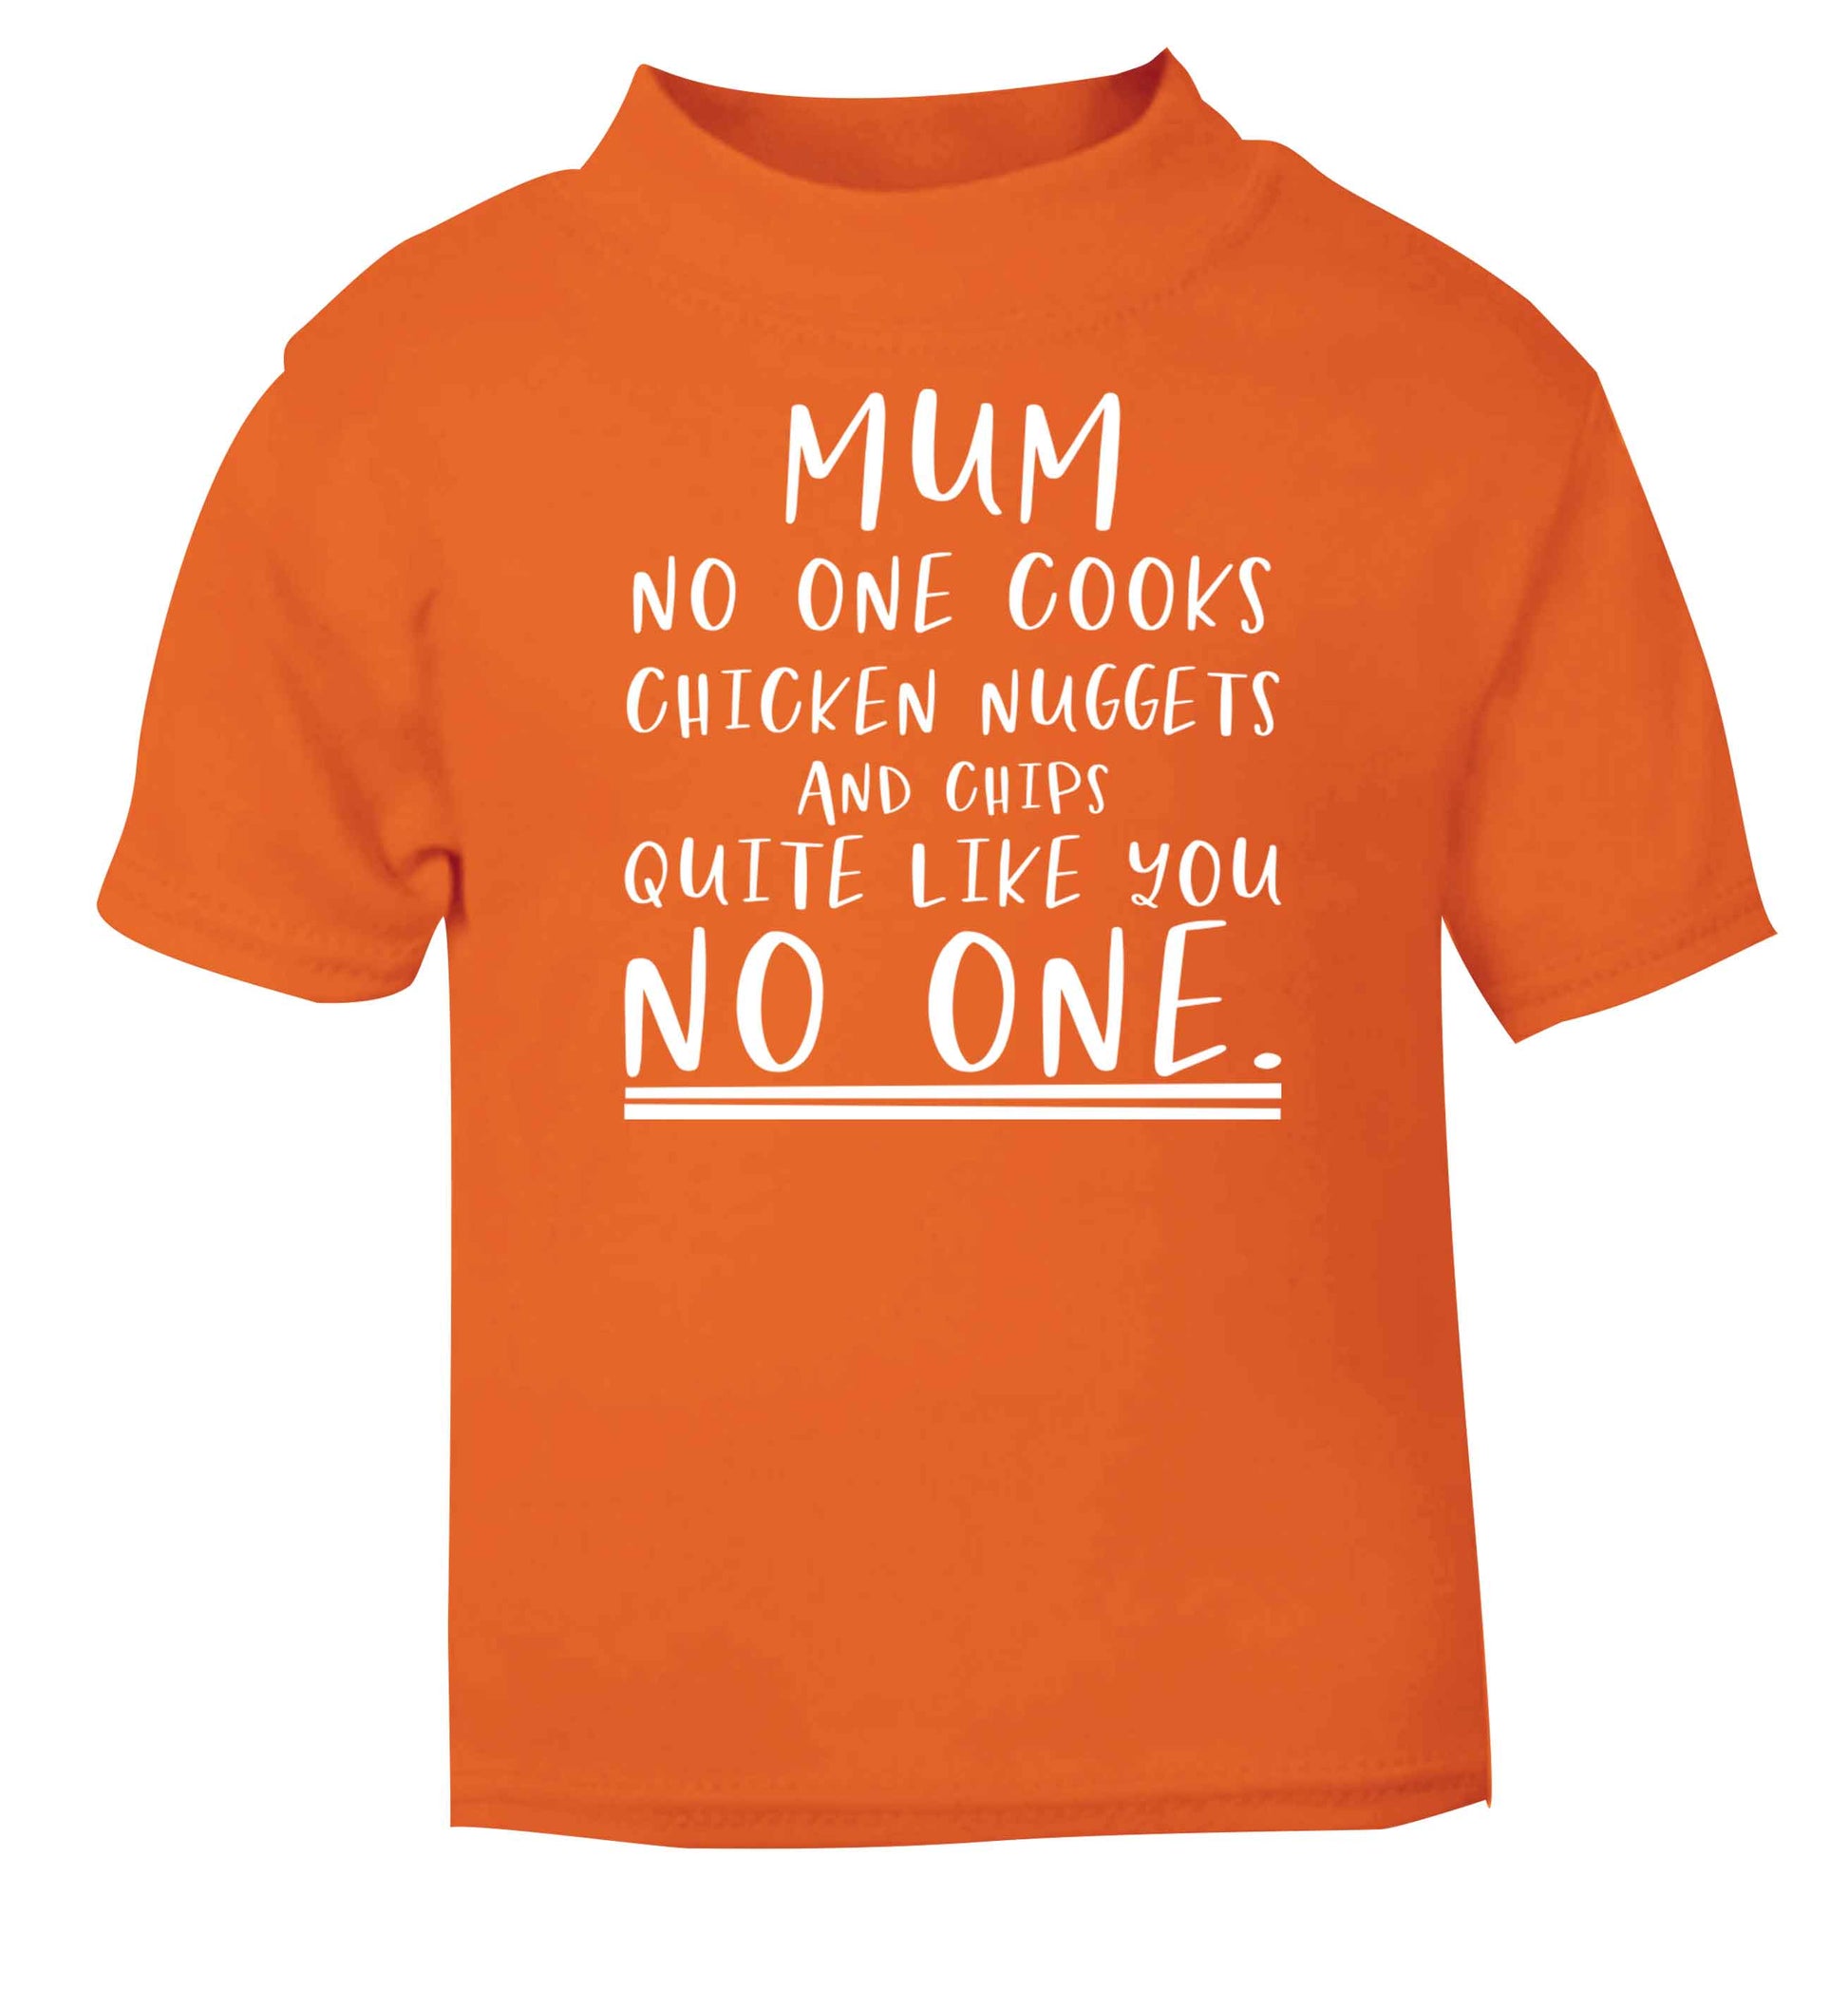 Super funny sassy gift for mother's day or birthday!  Mum no one cooks chicken nuggets and chips like you no one orange baby toddler Tshirt 2 Years